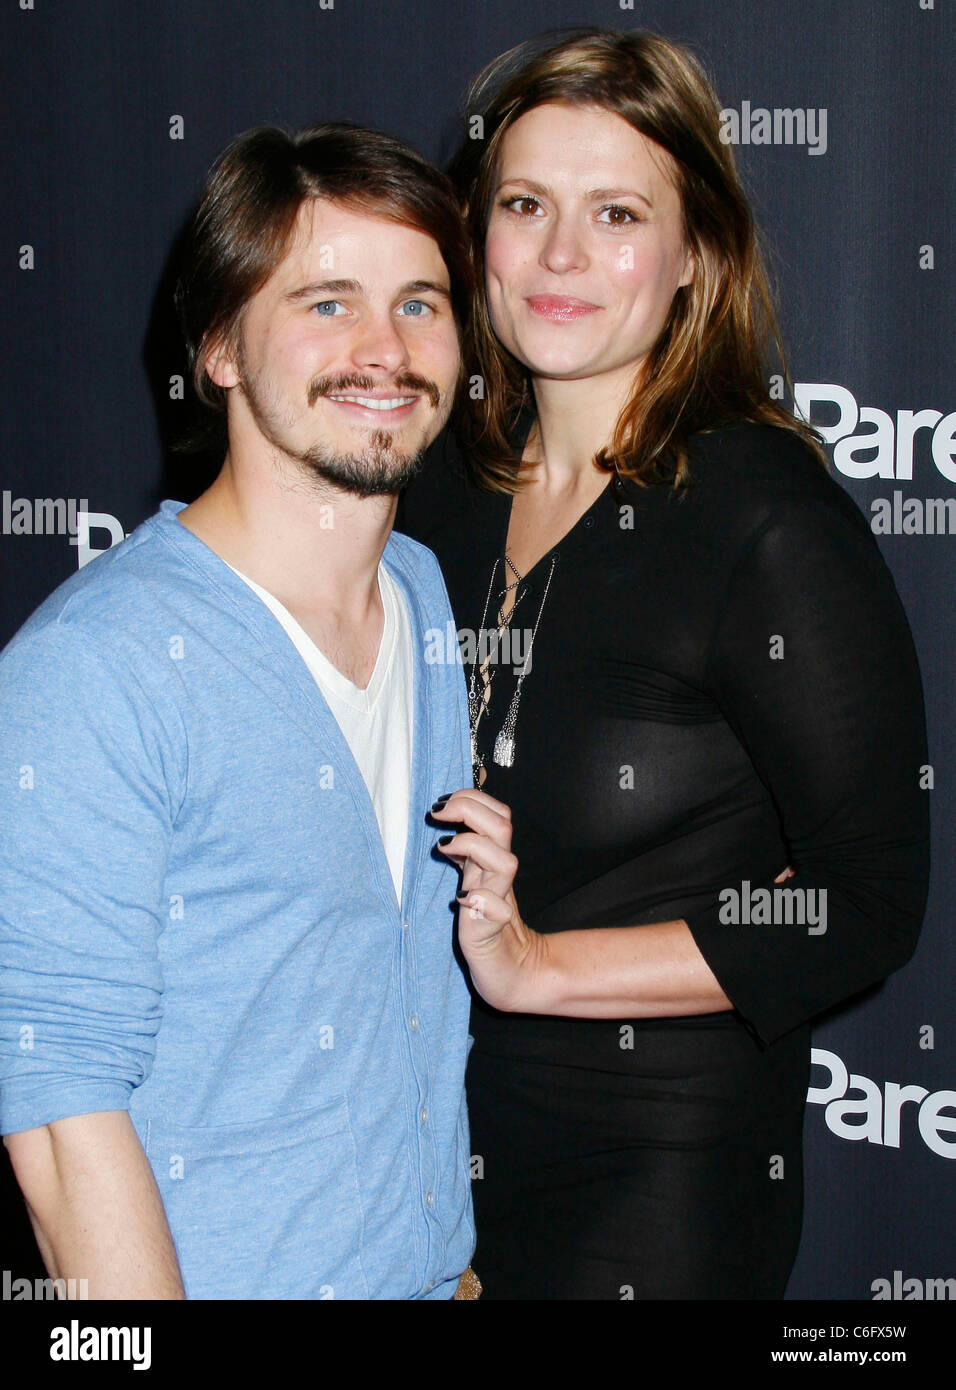 Jason Ritter and Marianna Palka NBC Universal's 'Parenthood' premiere screening held at the Director's Guild of America Los Stock Photo